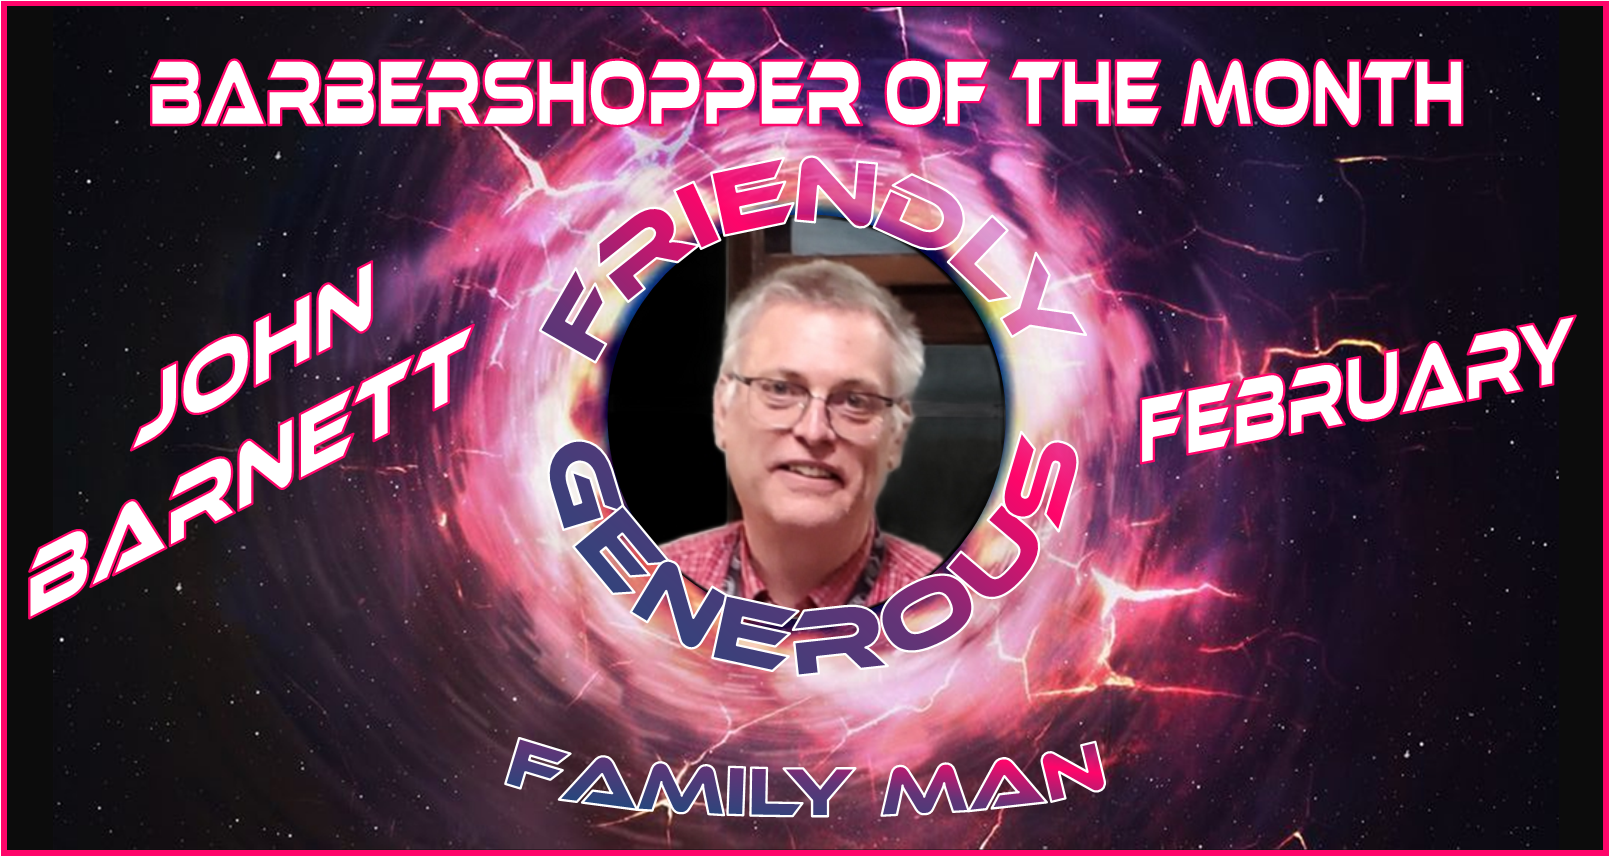 Barbershopper of the Month